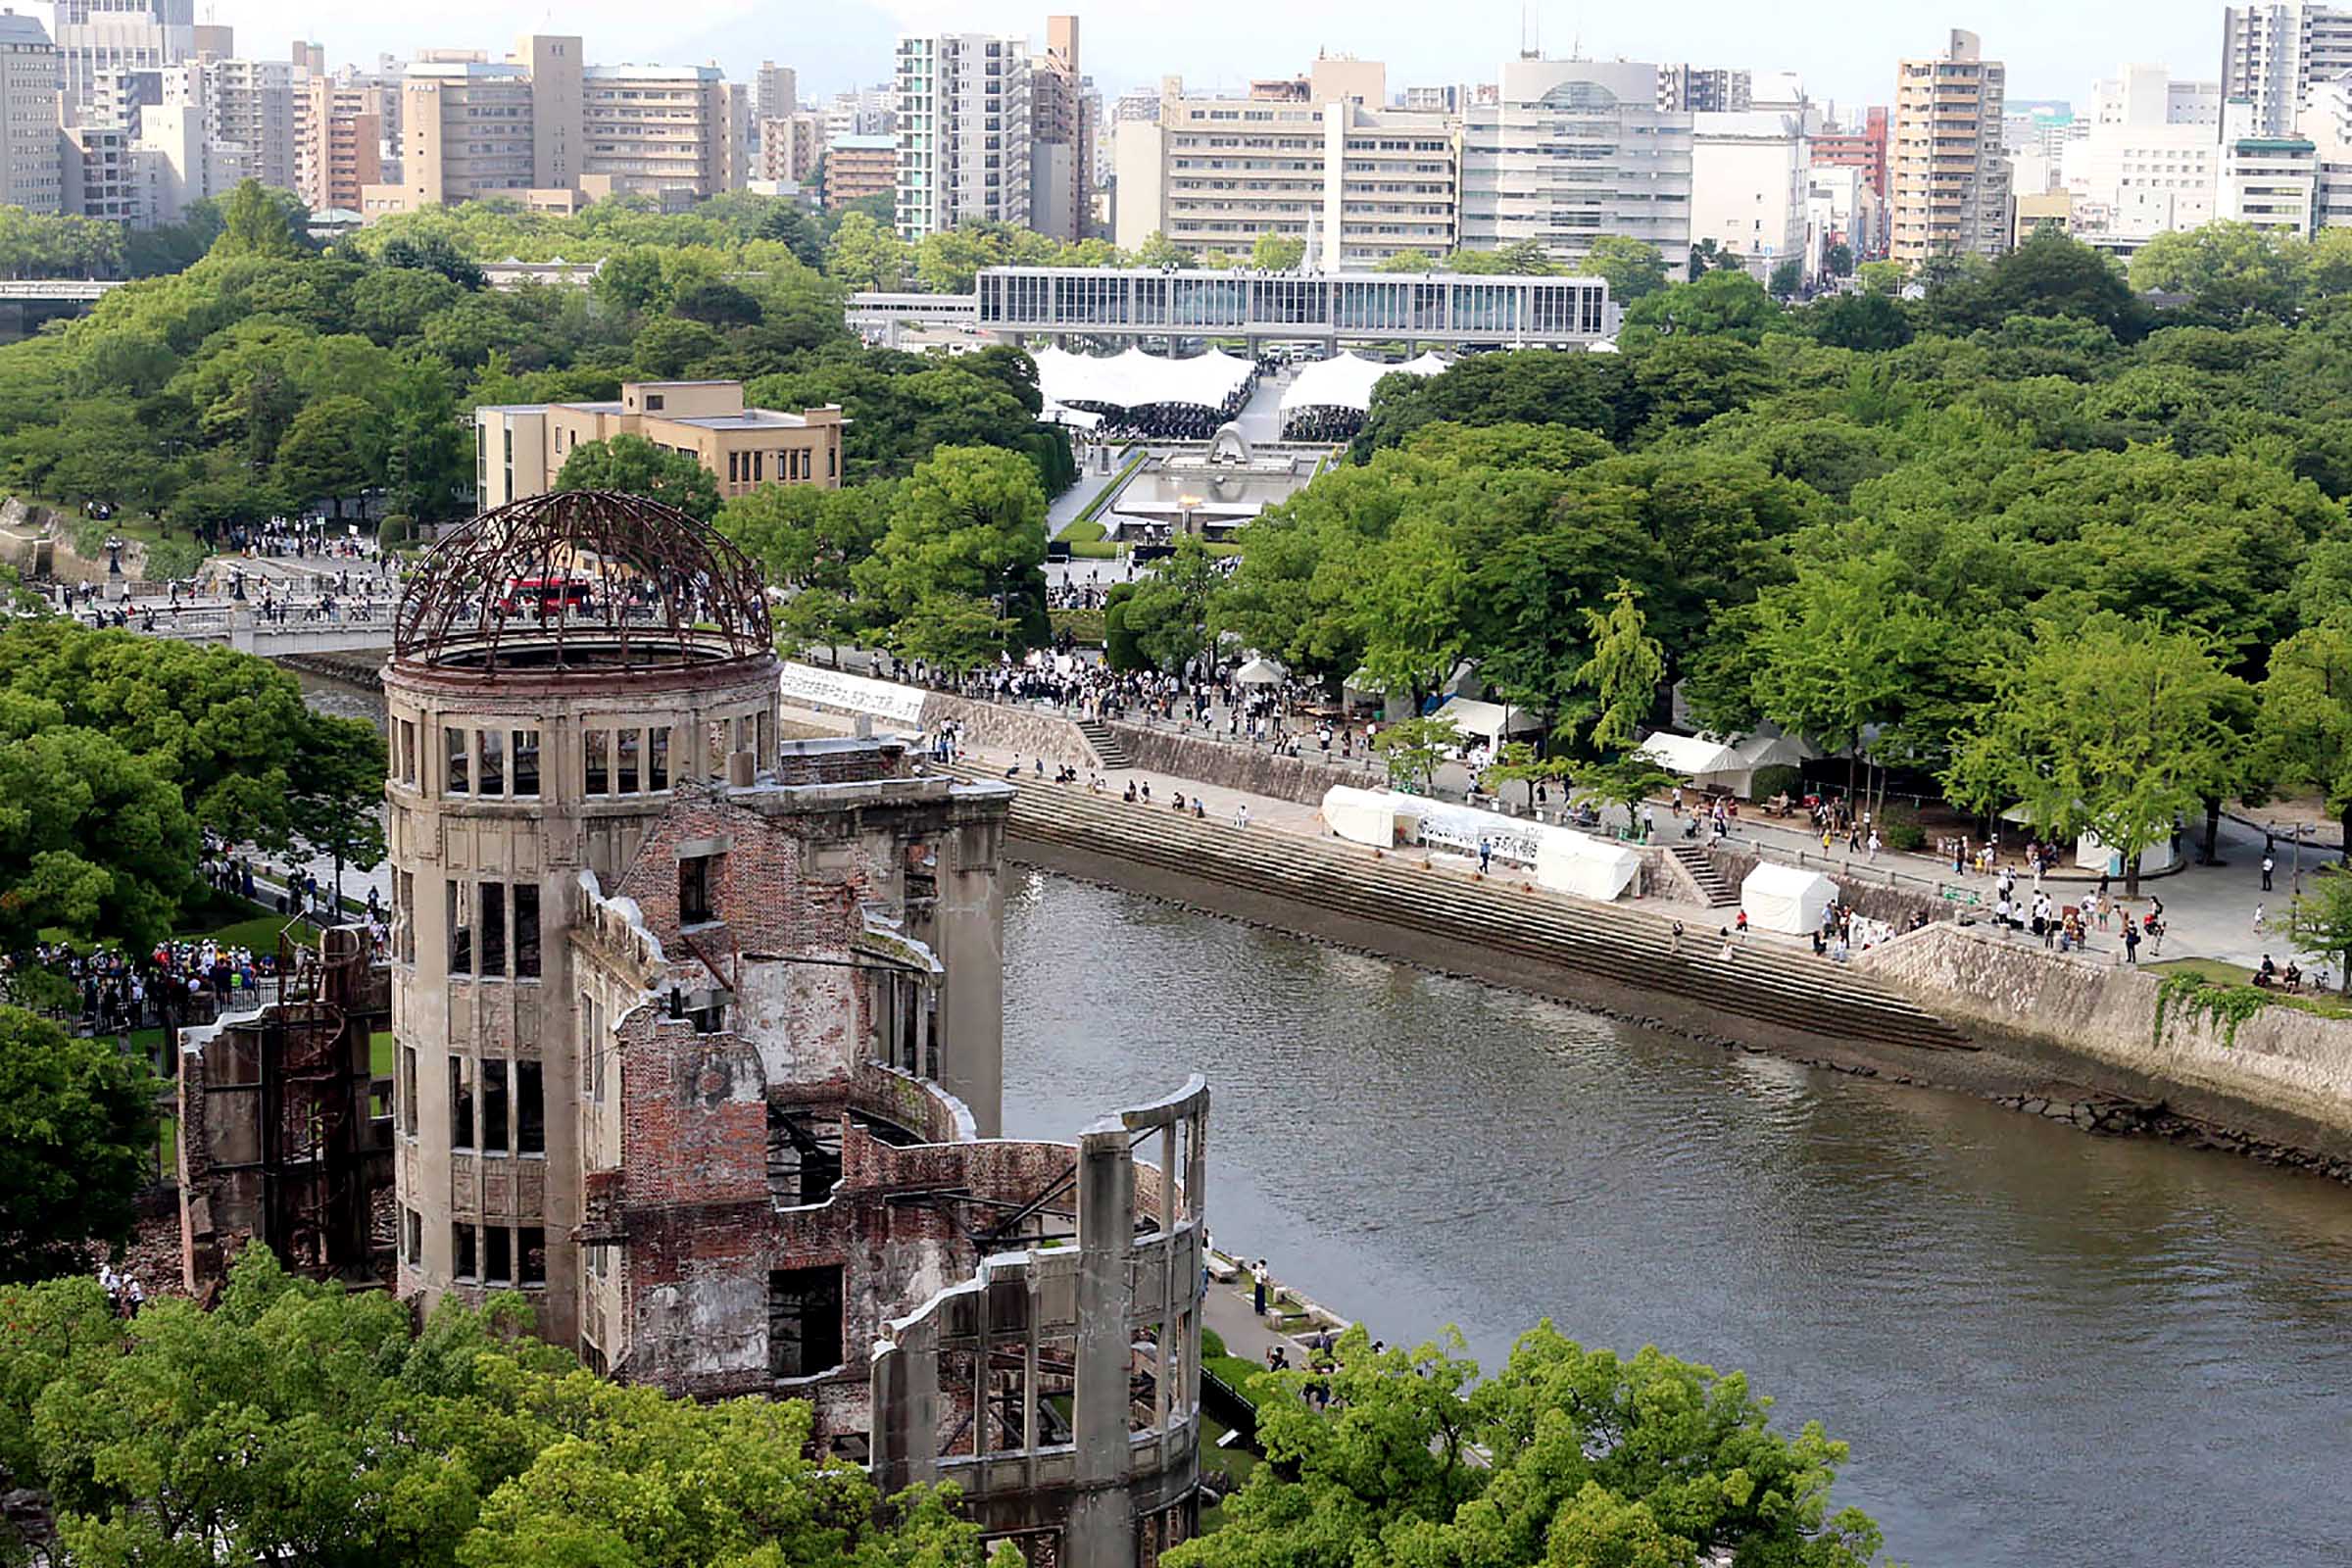 People walk along the water across from the Atomic Bomb Dome (L) as others attend the annual memorial ceremony at the Hiroshima Peace Memorial Park (back C) in Hiroshima on August 6, 2022, to mark 77 years since the world's first atomic bomb attack. (Photo by JIJI PRESS / AFP) / Japan OUT